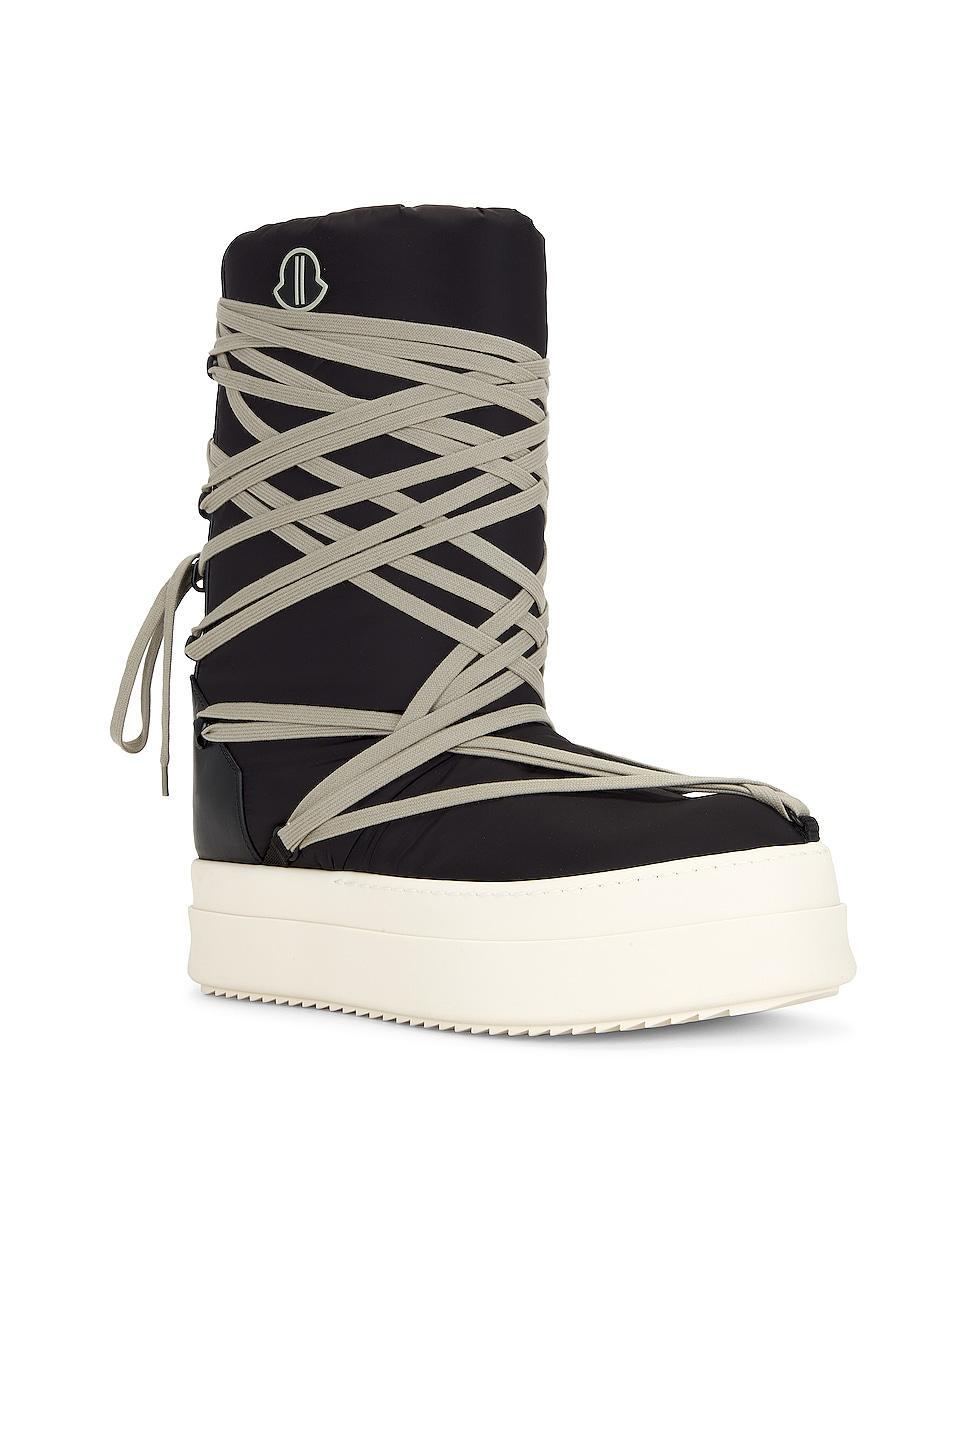 Womens Rick Owens x Moncler Leather Boots Product Image